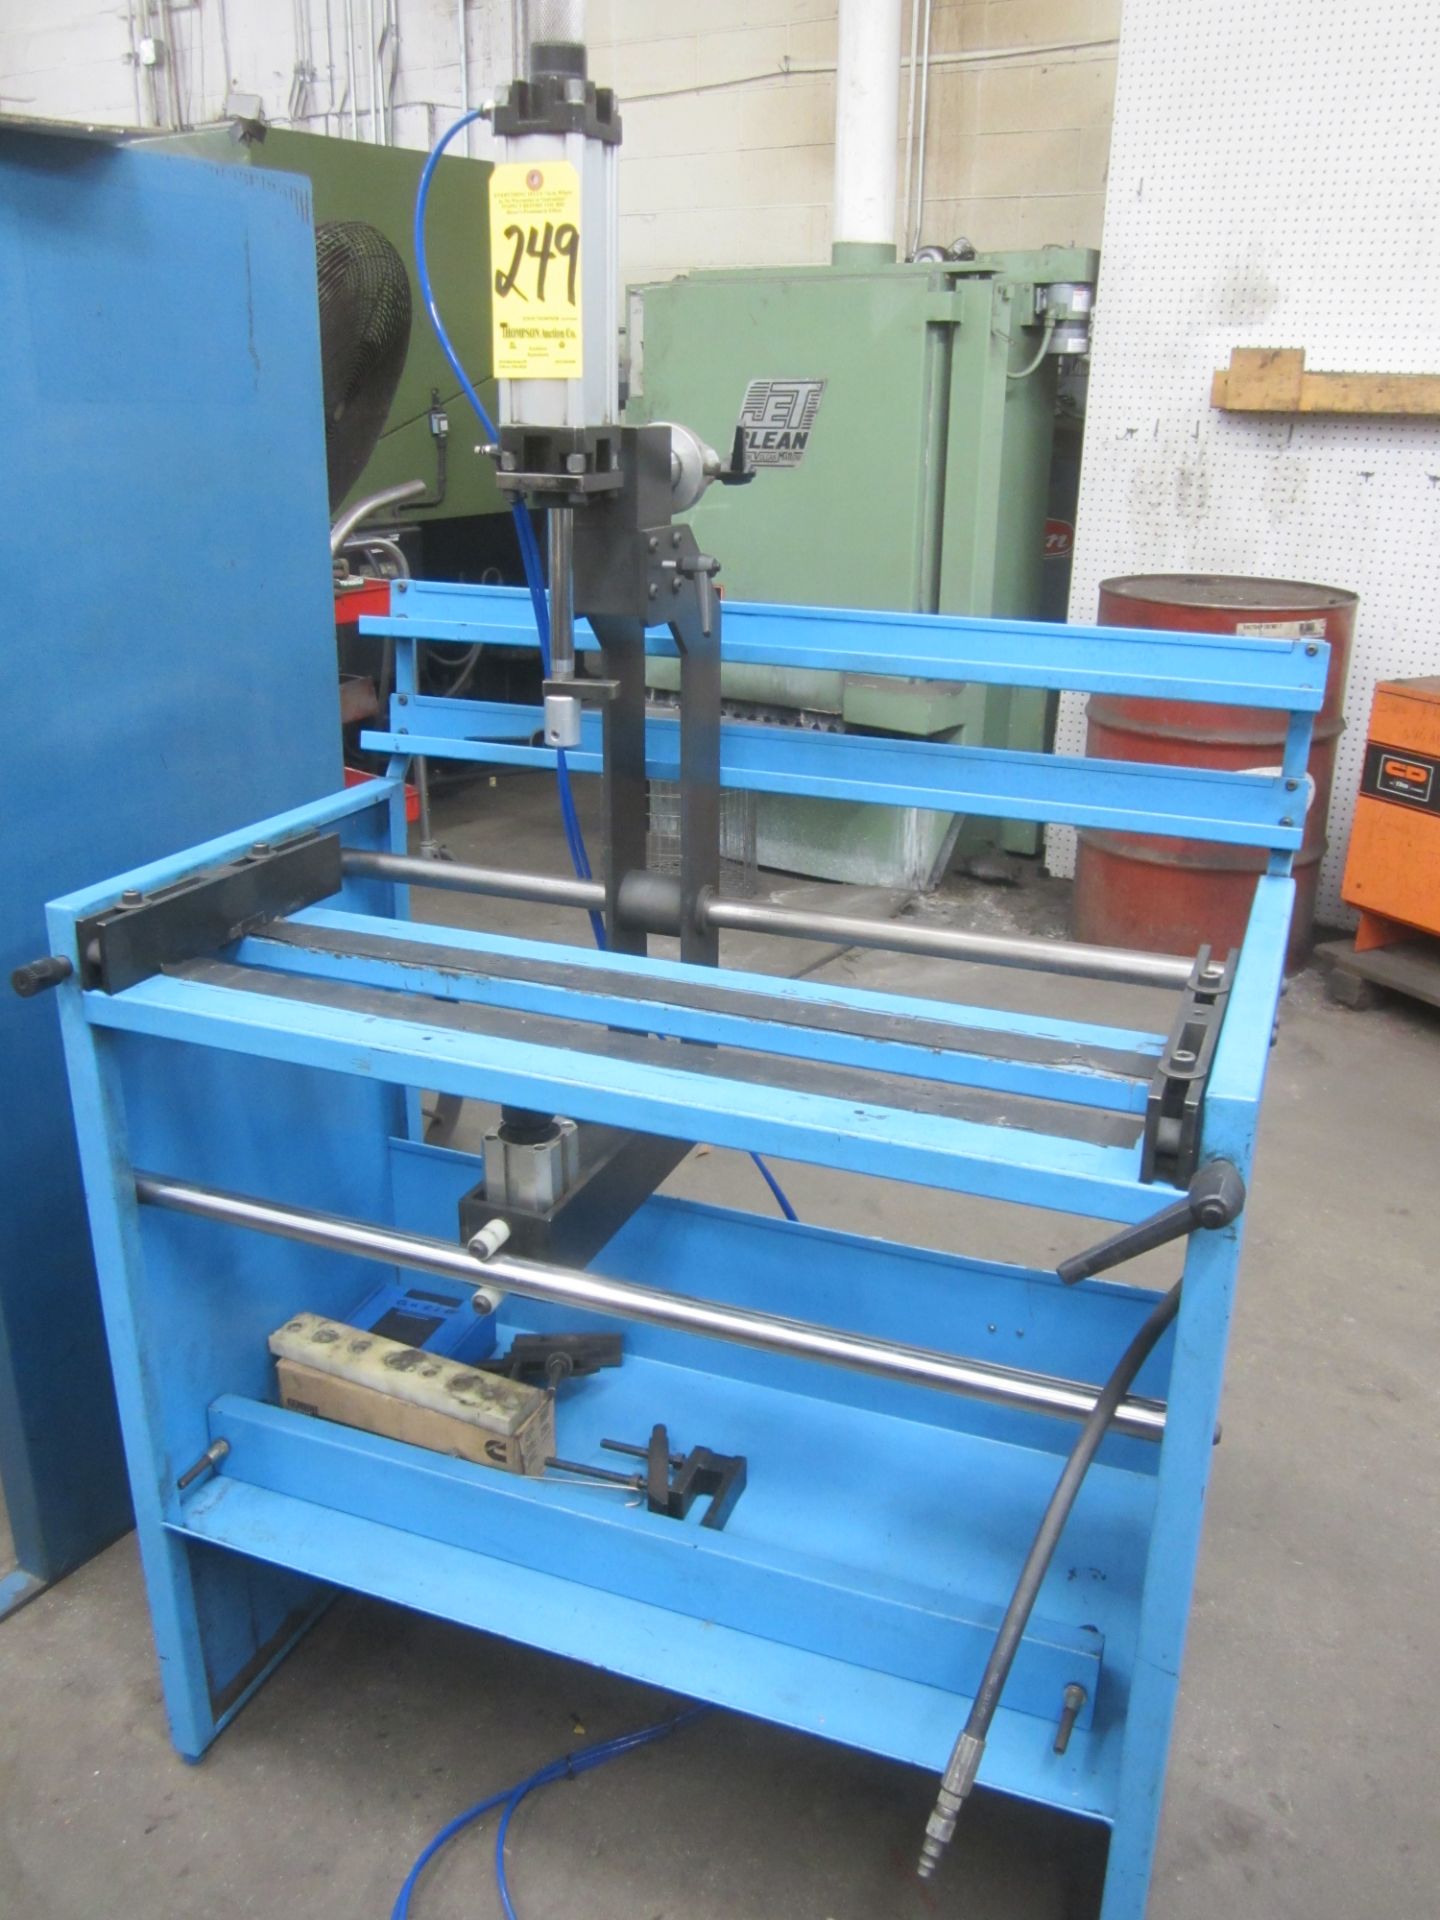 QUELO Model BUC-97 Pneumatic Cylinder Head Assemble and Disassemble Bench, Loading Fee $25.00